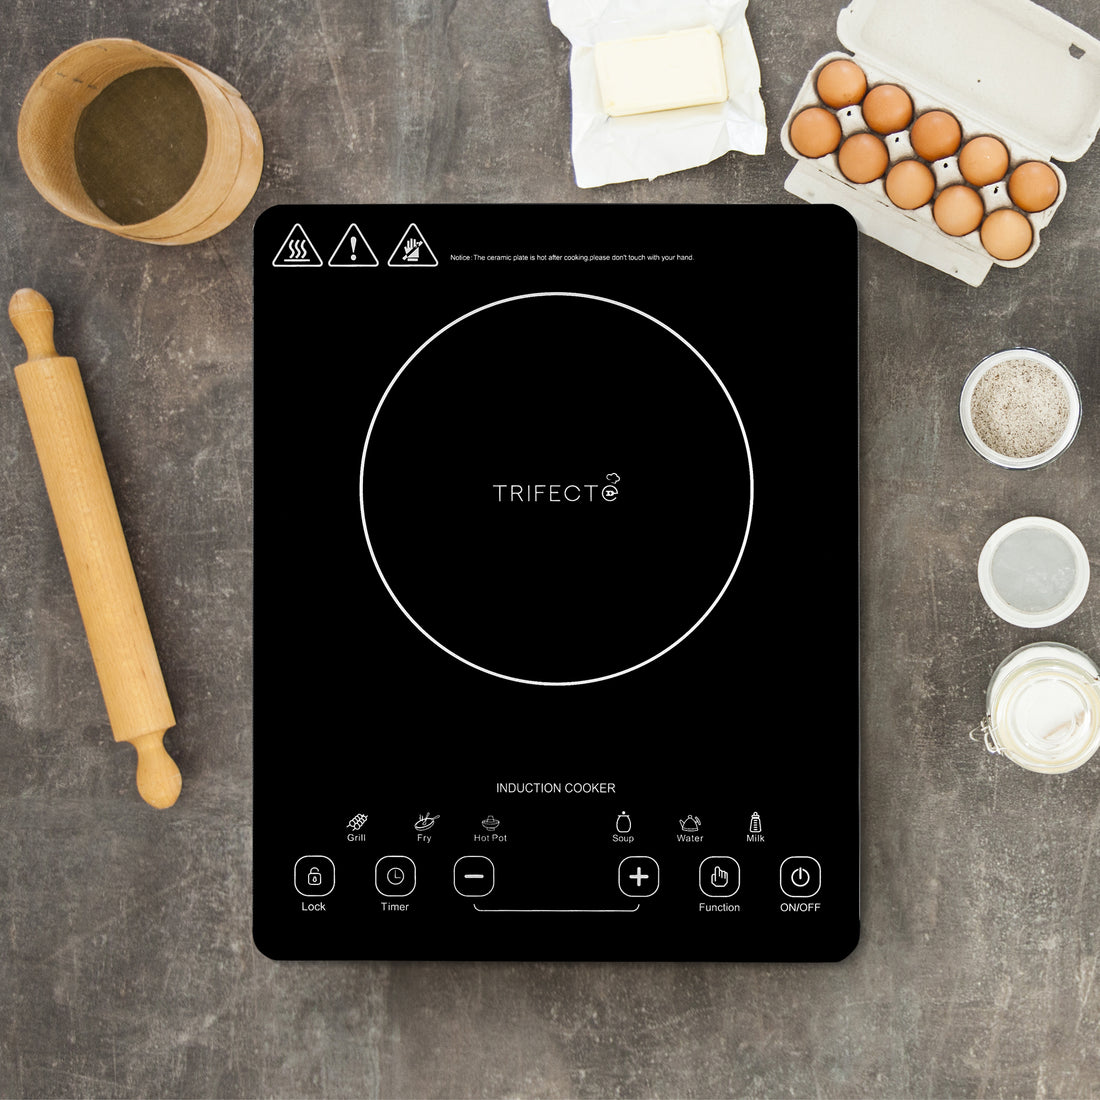 there are 6 cooking functions for 1800W 11inch portable induction cooktop to adjust.